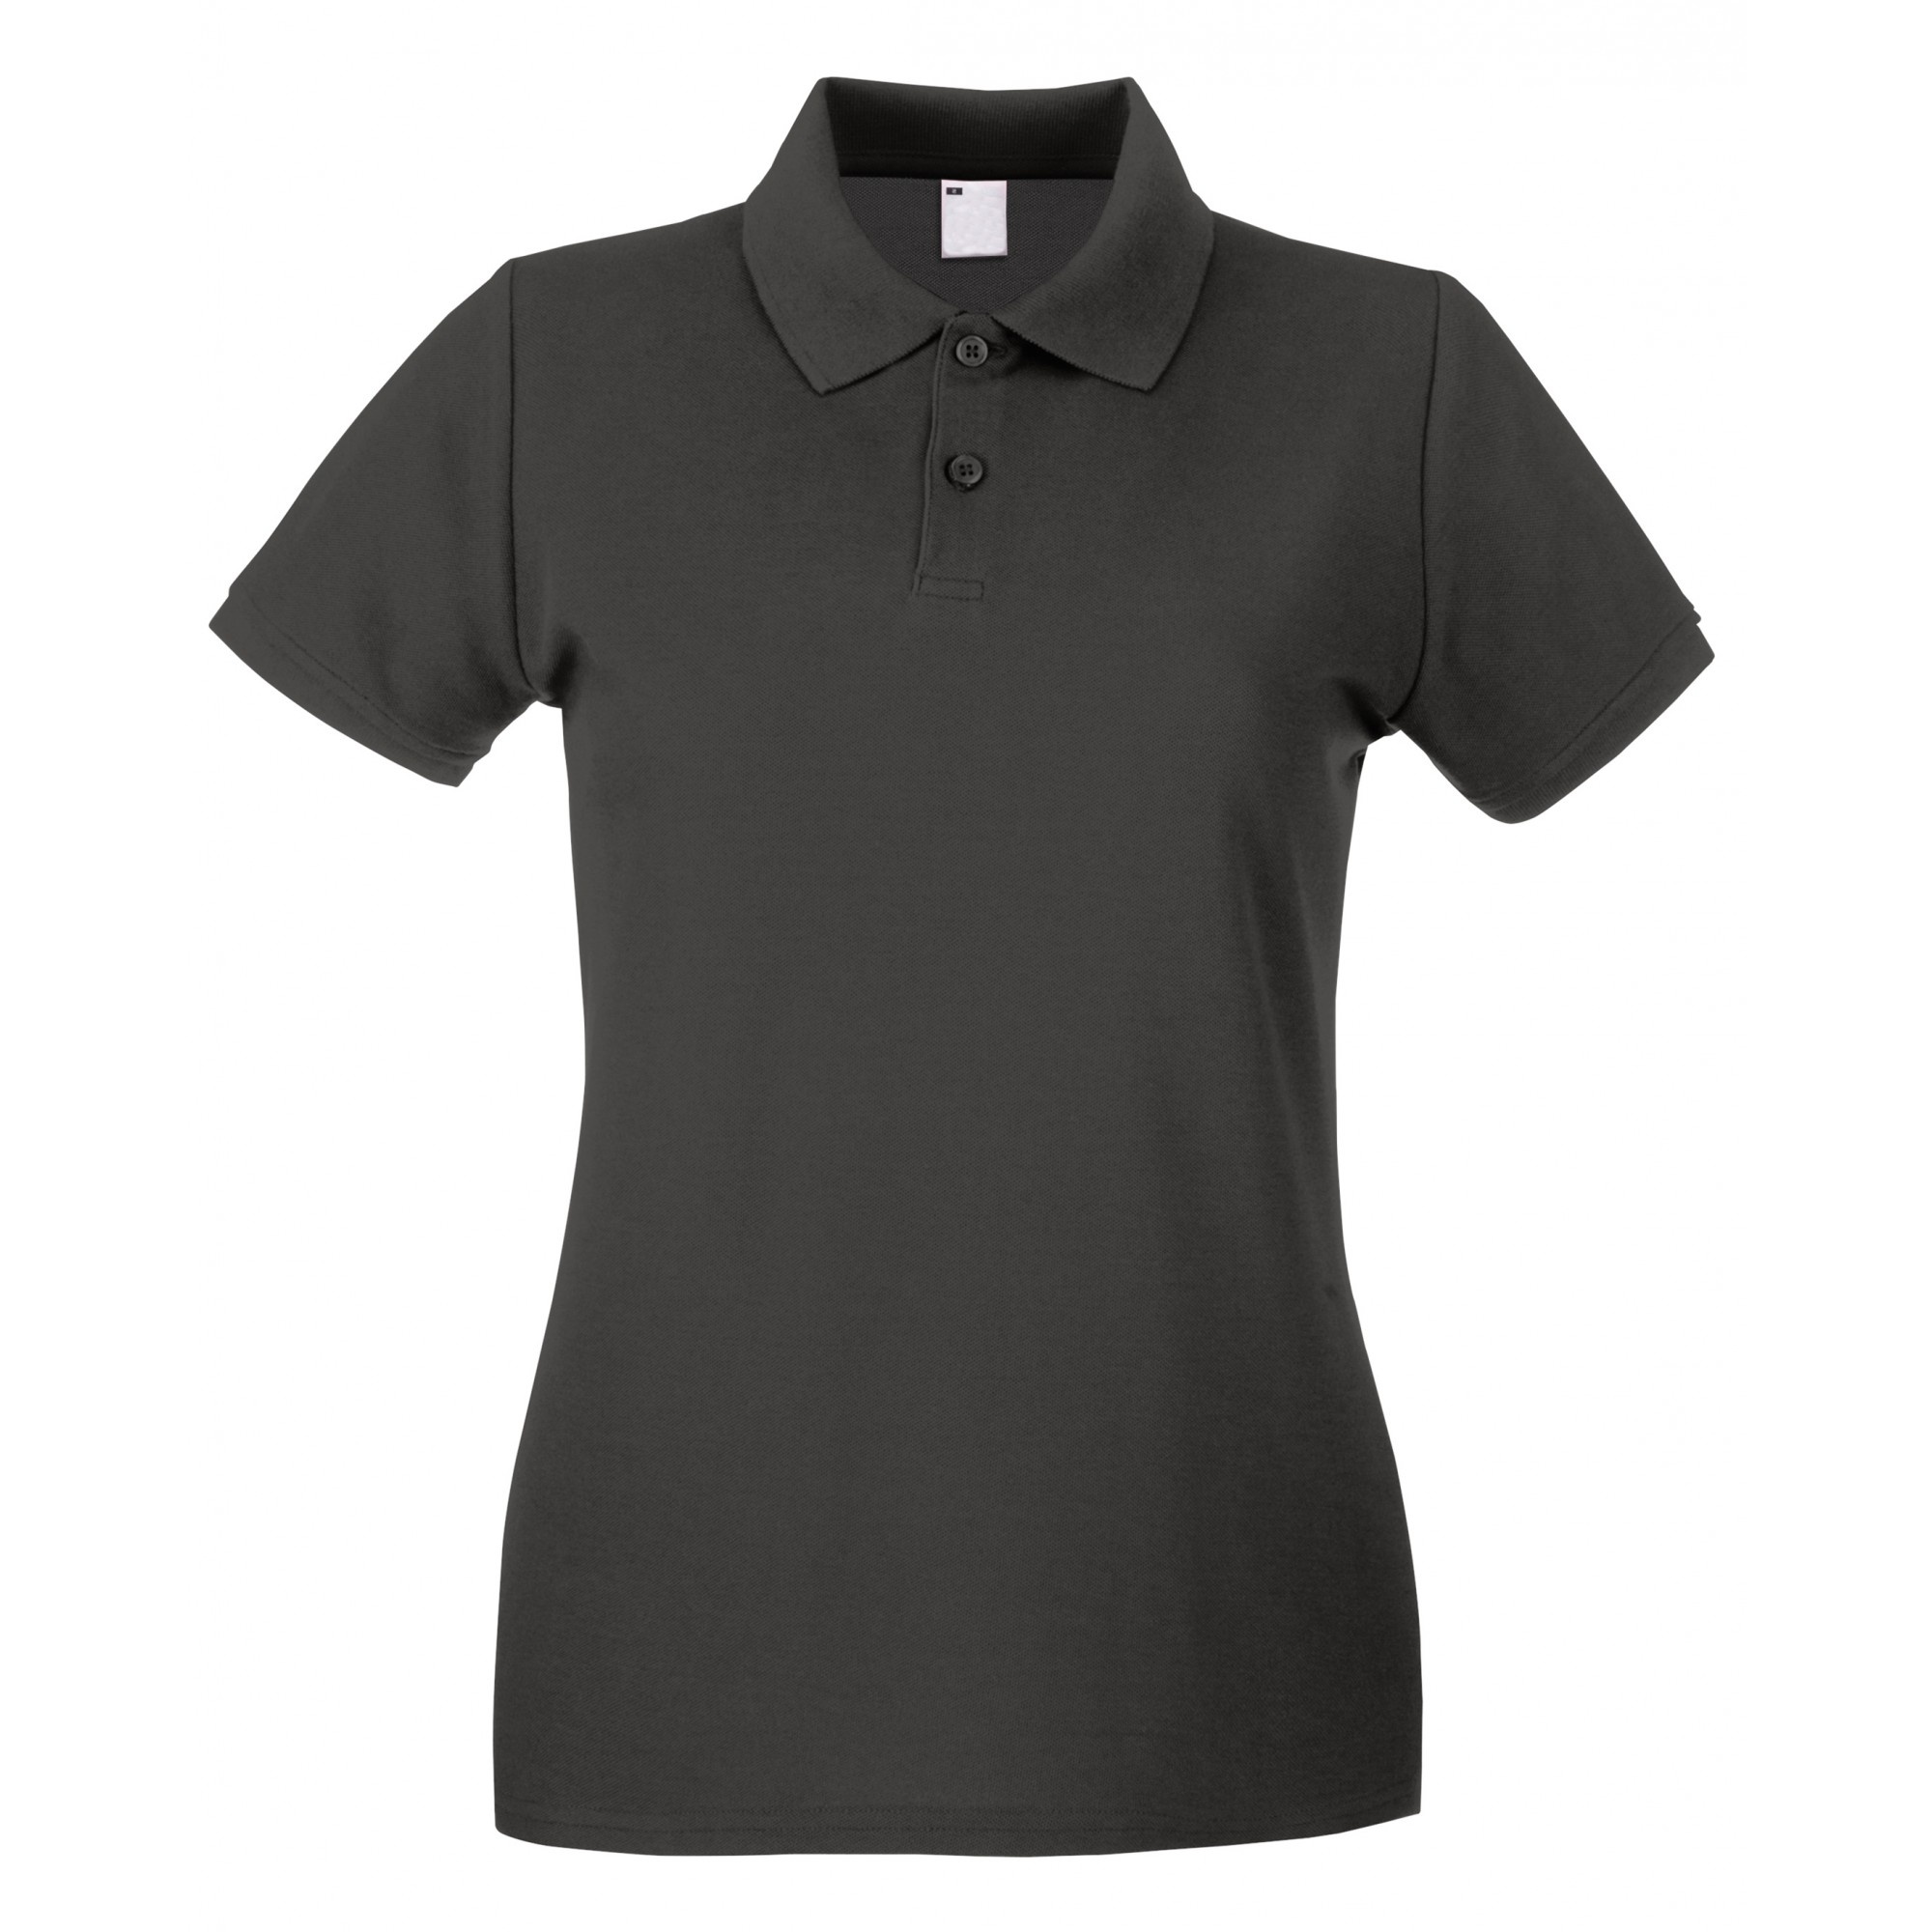 /ladies Fitted Short Sleeve Casual Polo Shirt Universal Textiles - gris-oscuro - 